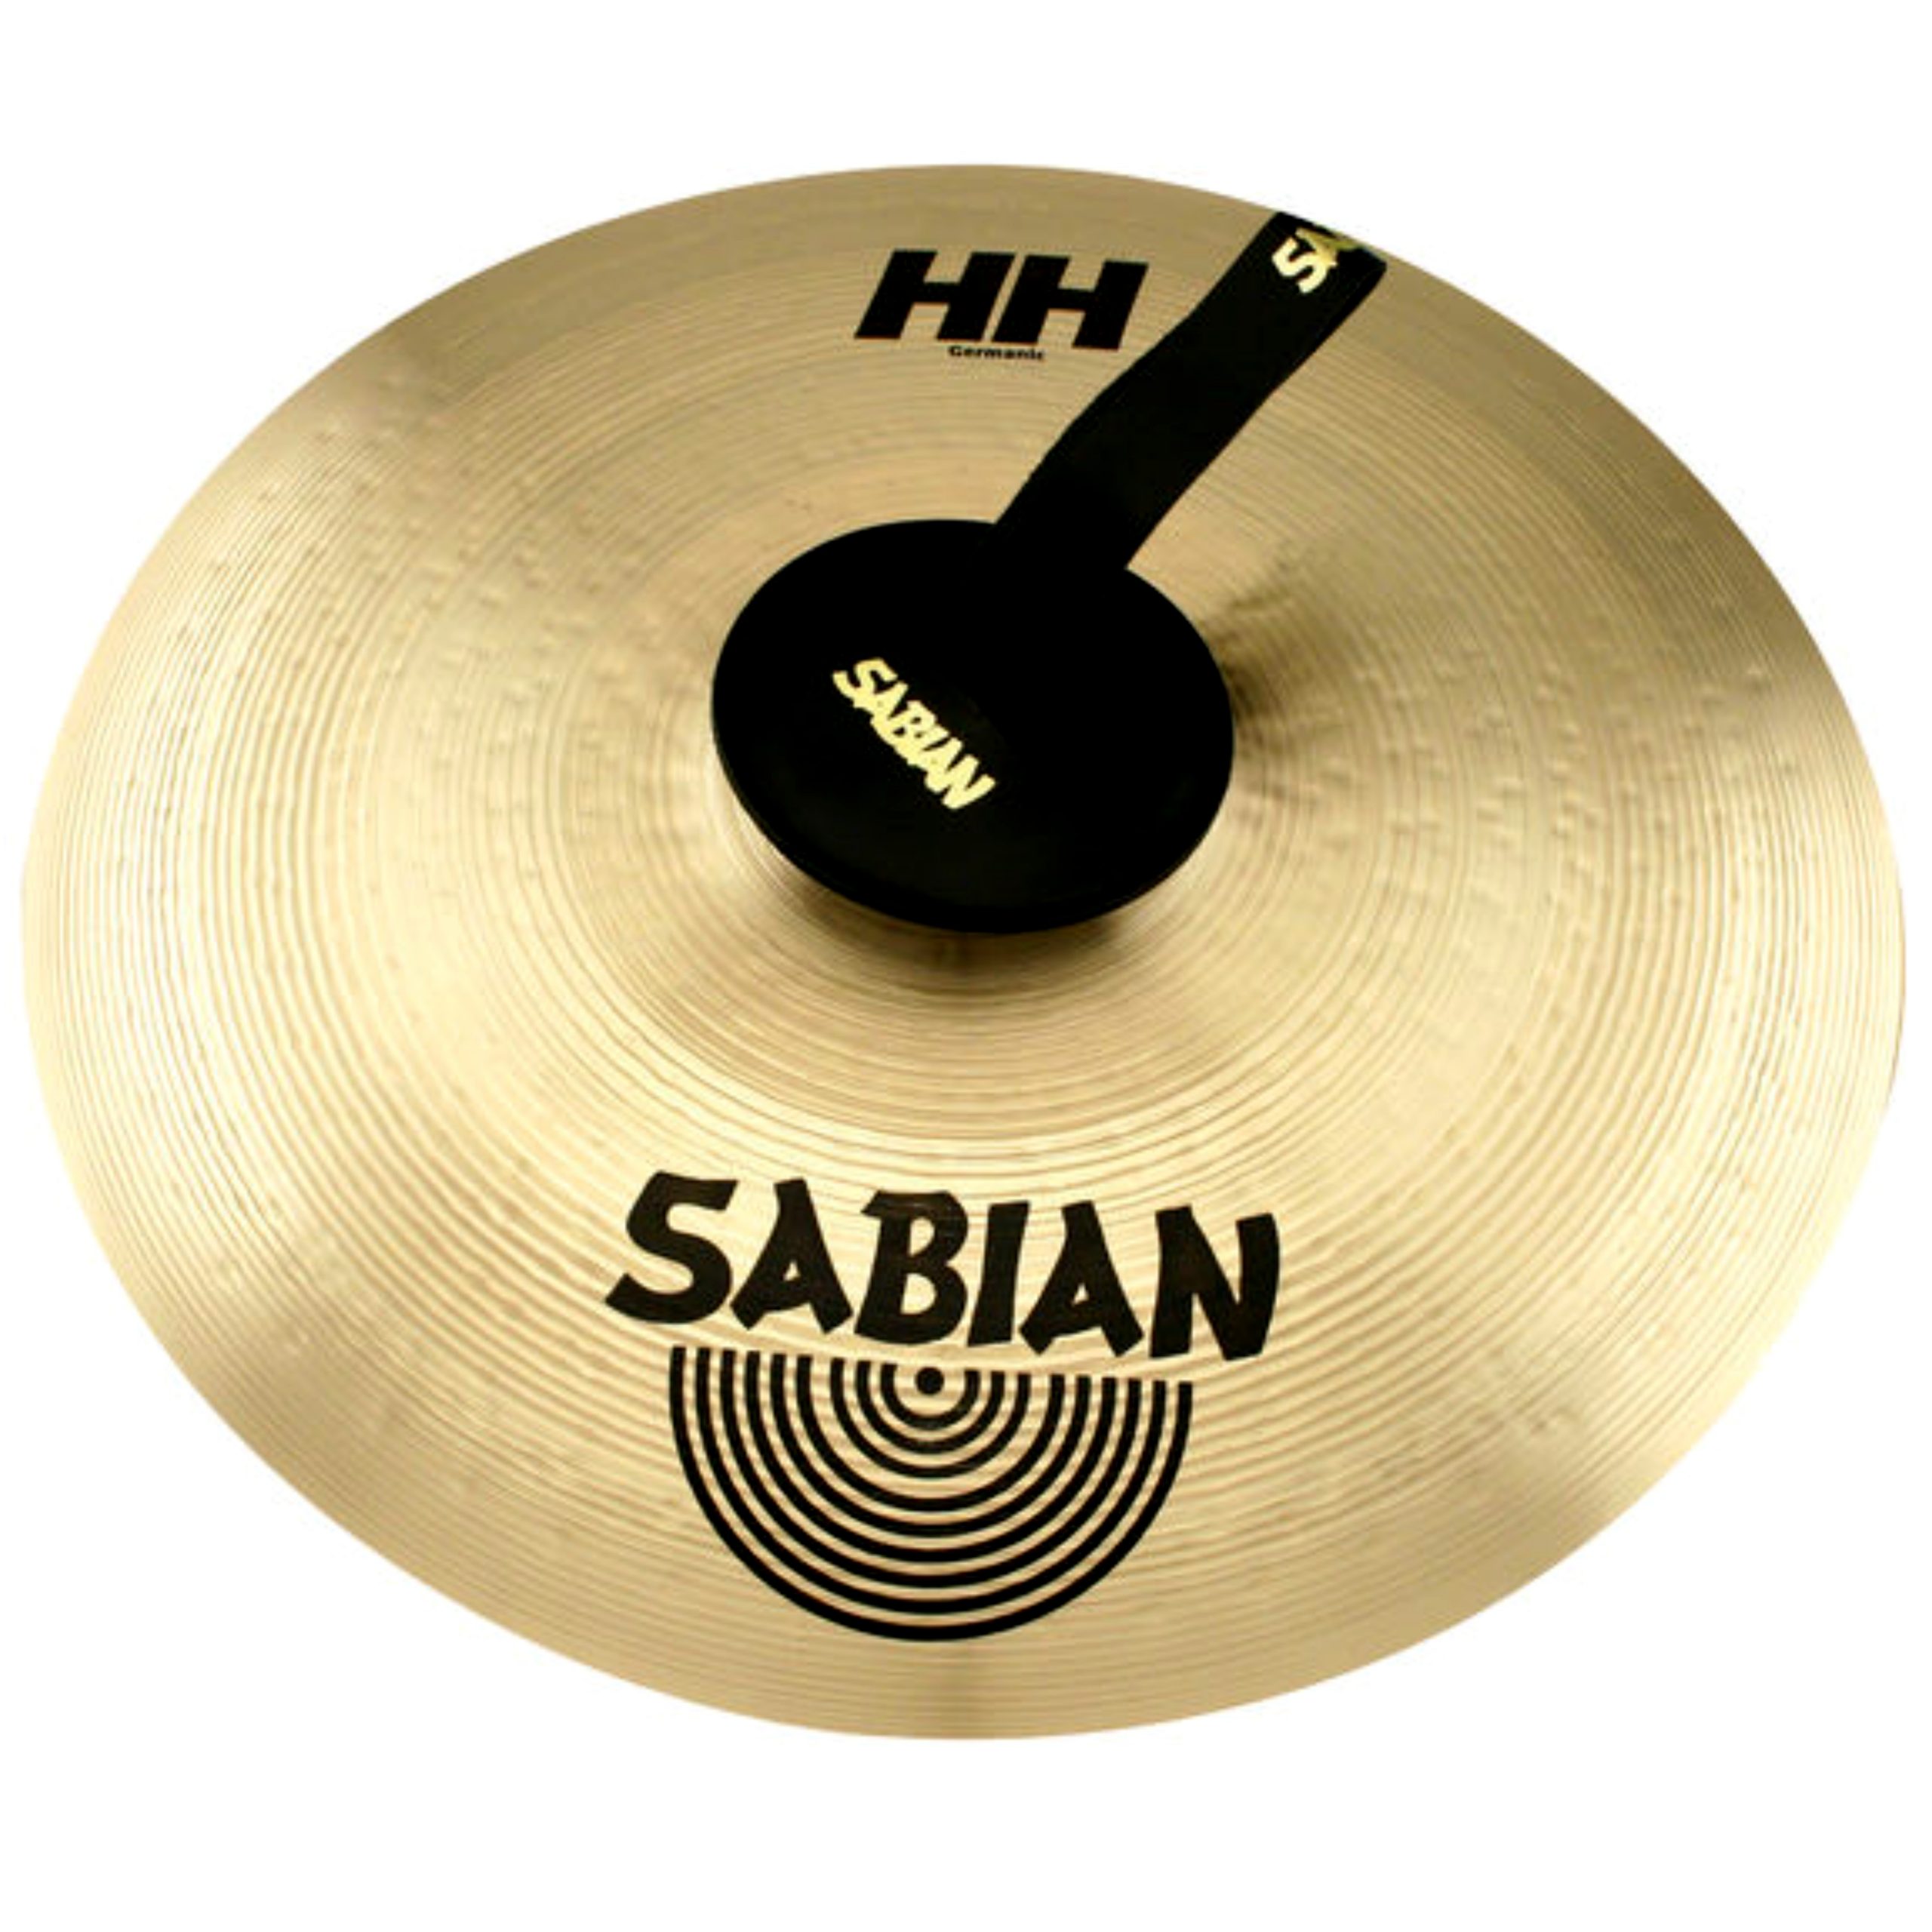 Sabian 19 inch HH Orchestral-Band Germanic pair